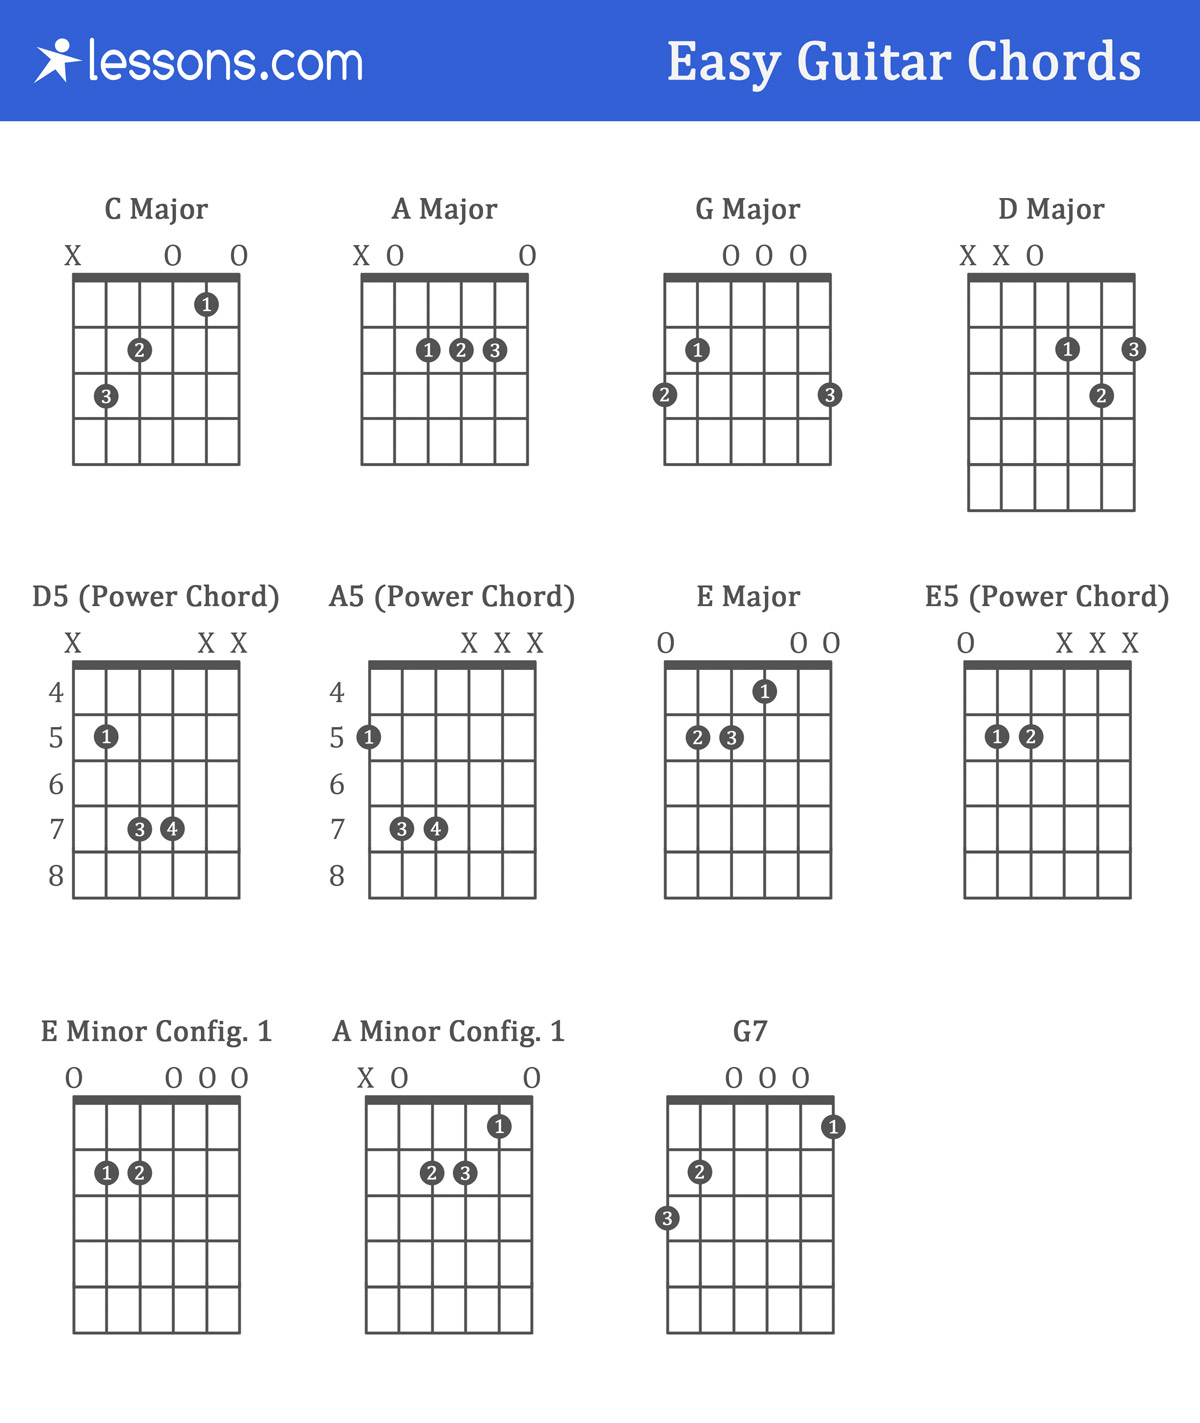 Guitar Chords For Beginners The 11 Easy Guitar Chords For Beginners With Charts Examples